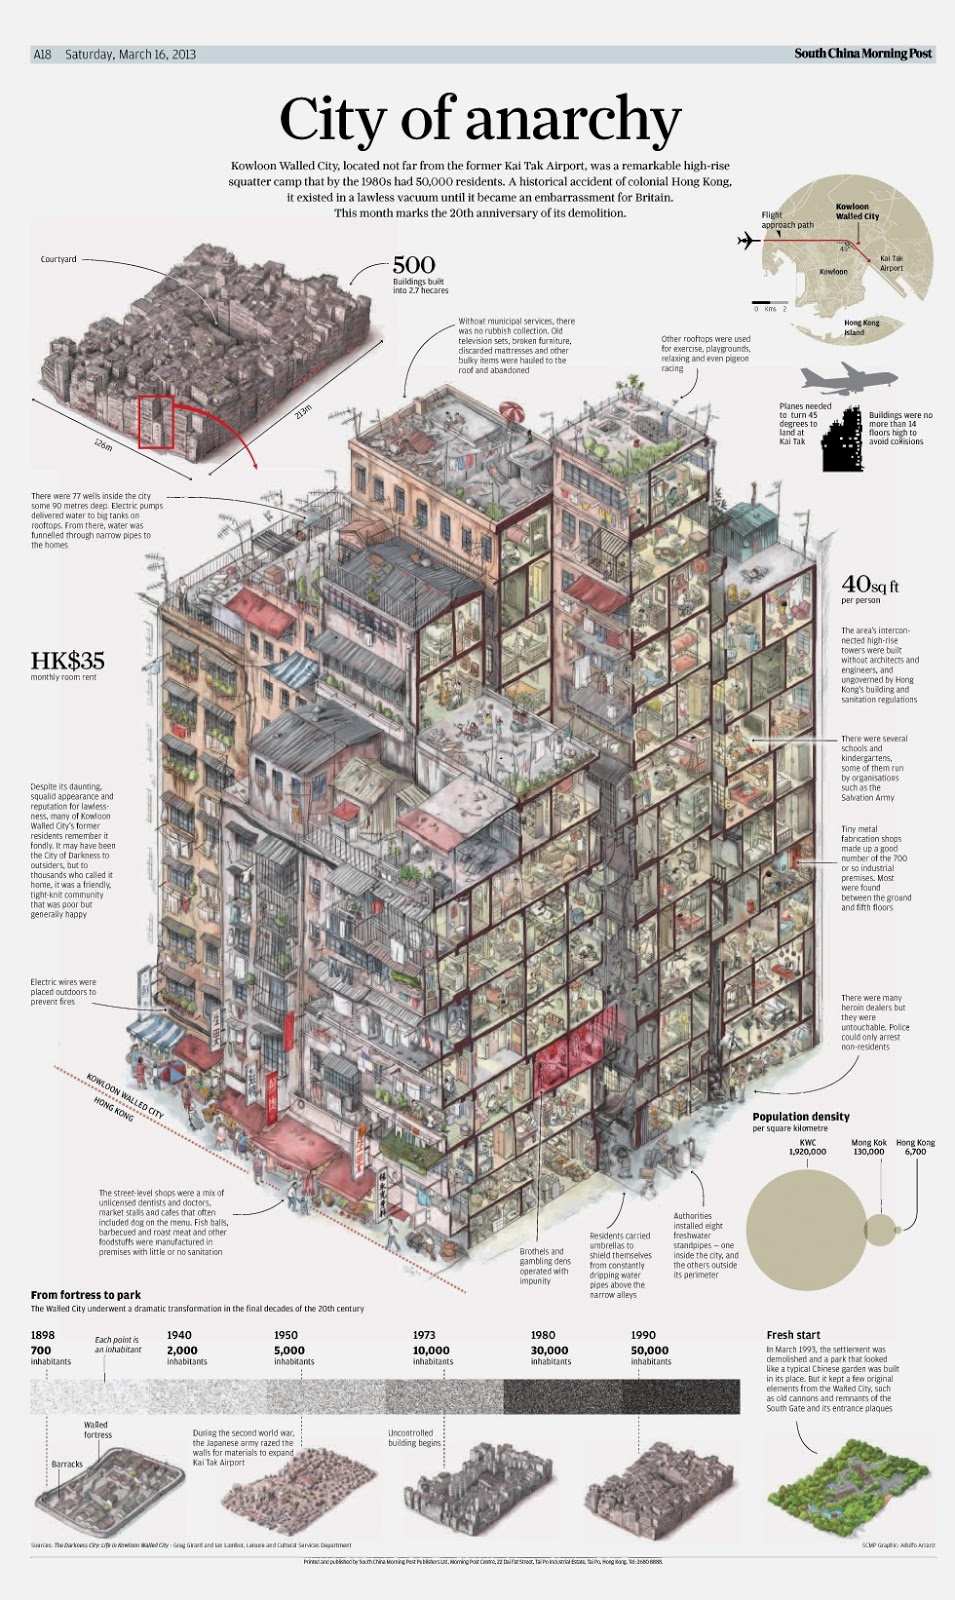 http://www.scmp.com/infographics/article/1193675/remembering-kowloon-walled-city